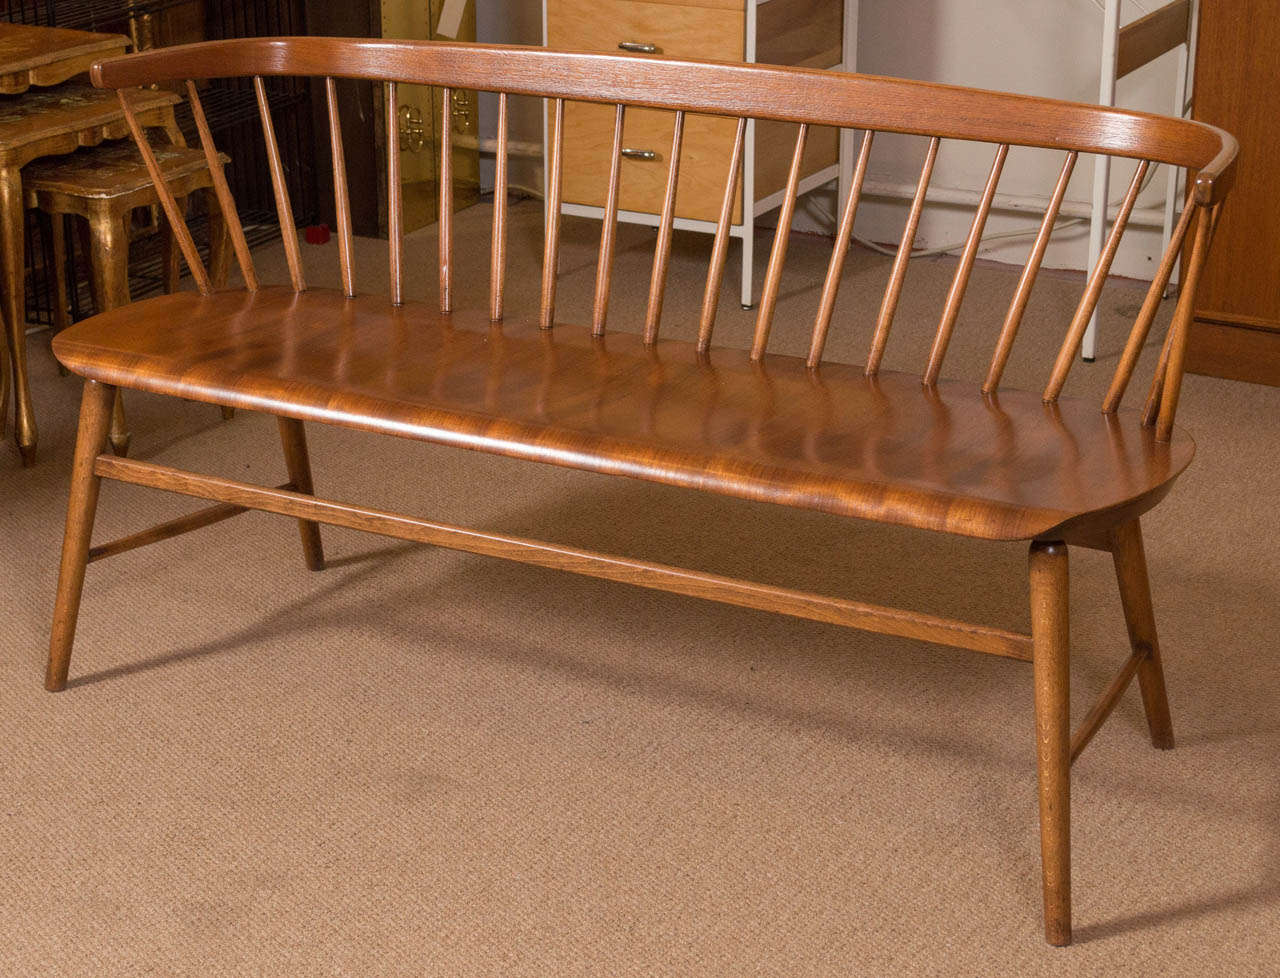 Some great lines on this Deacon's bench. Seating area is a molded plywood with the top layer being Teak, with legs and backrest Walnut. No markings but the previous owners parents owned a Danish furniture store in Washington state, where they said